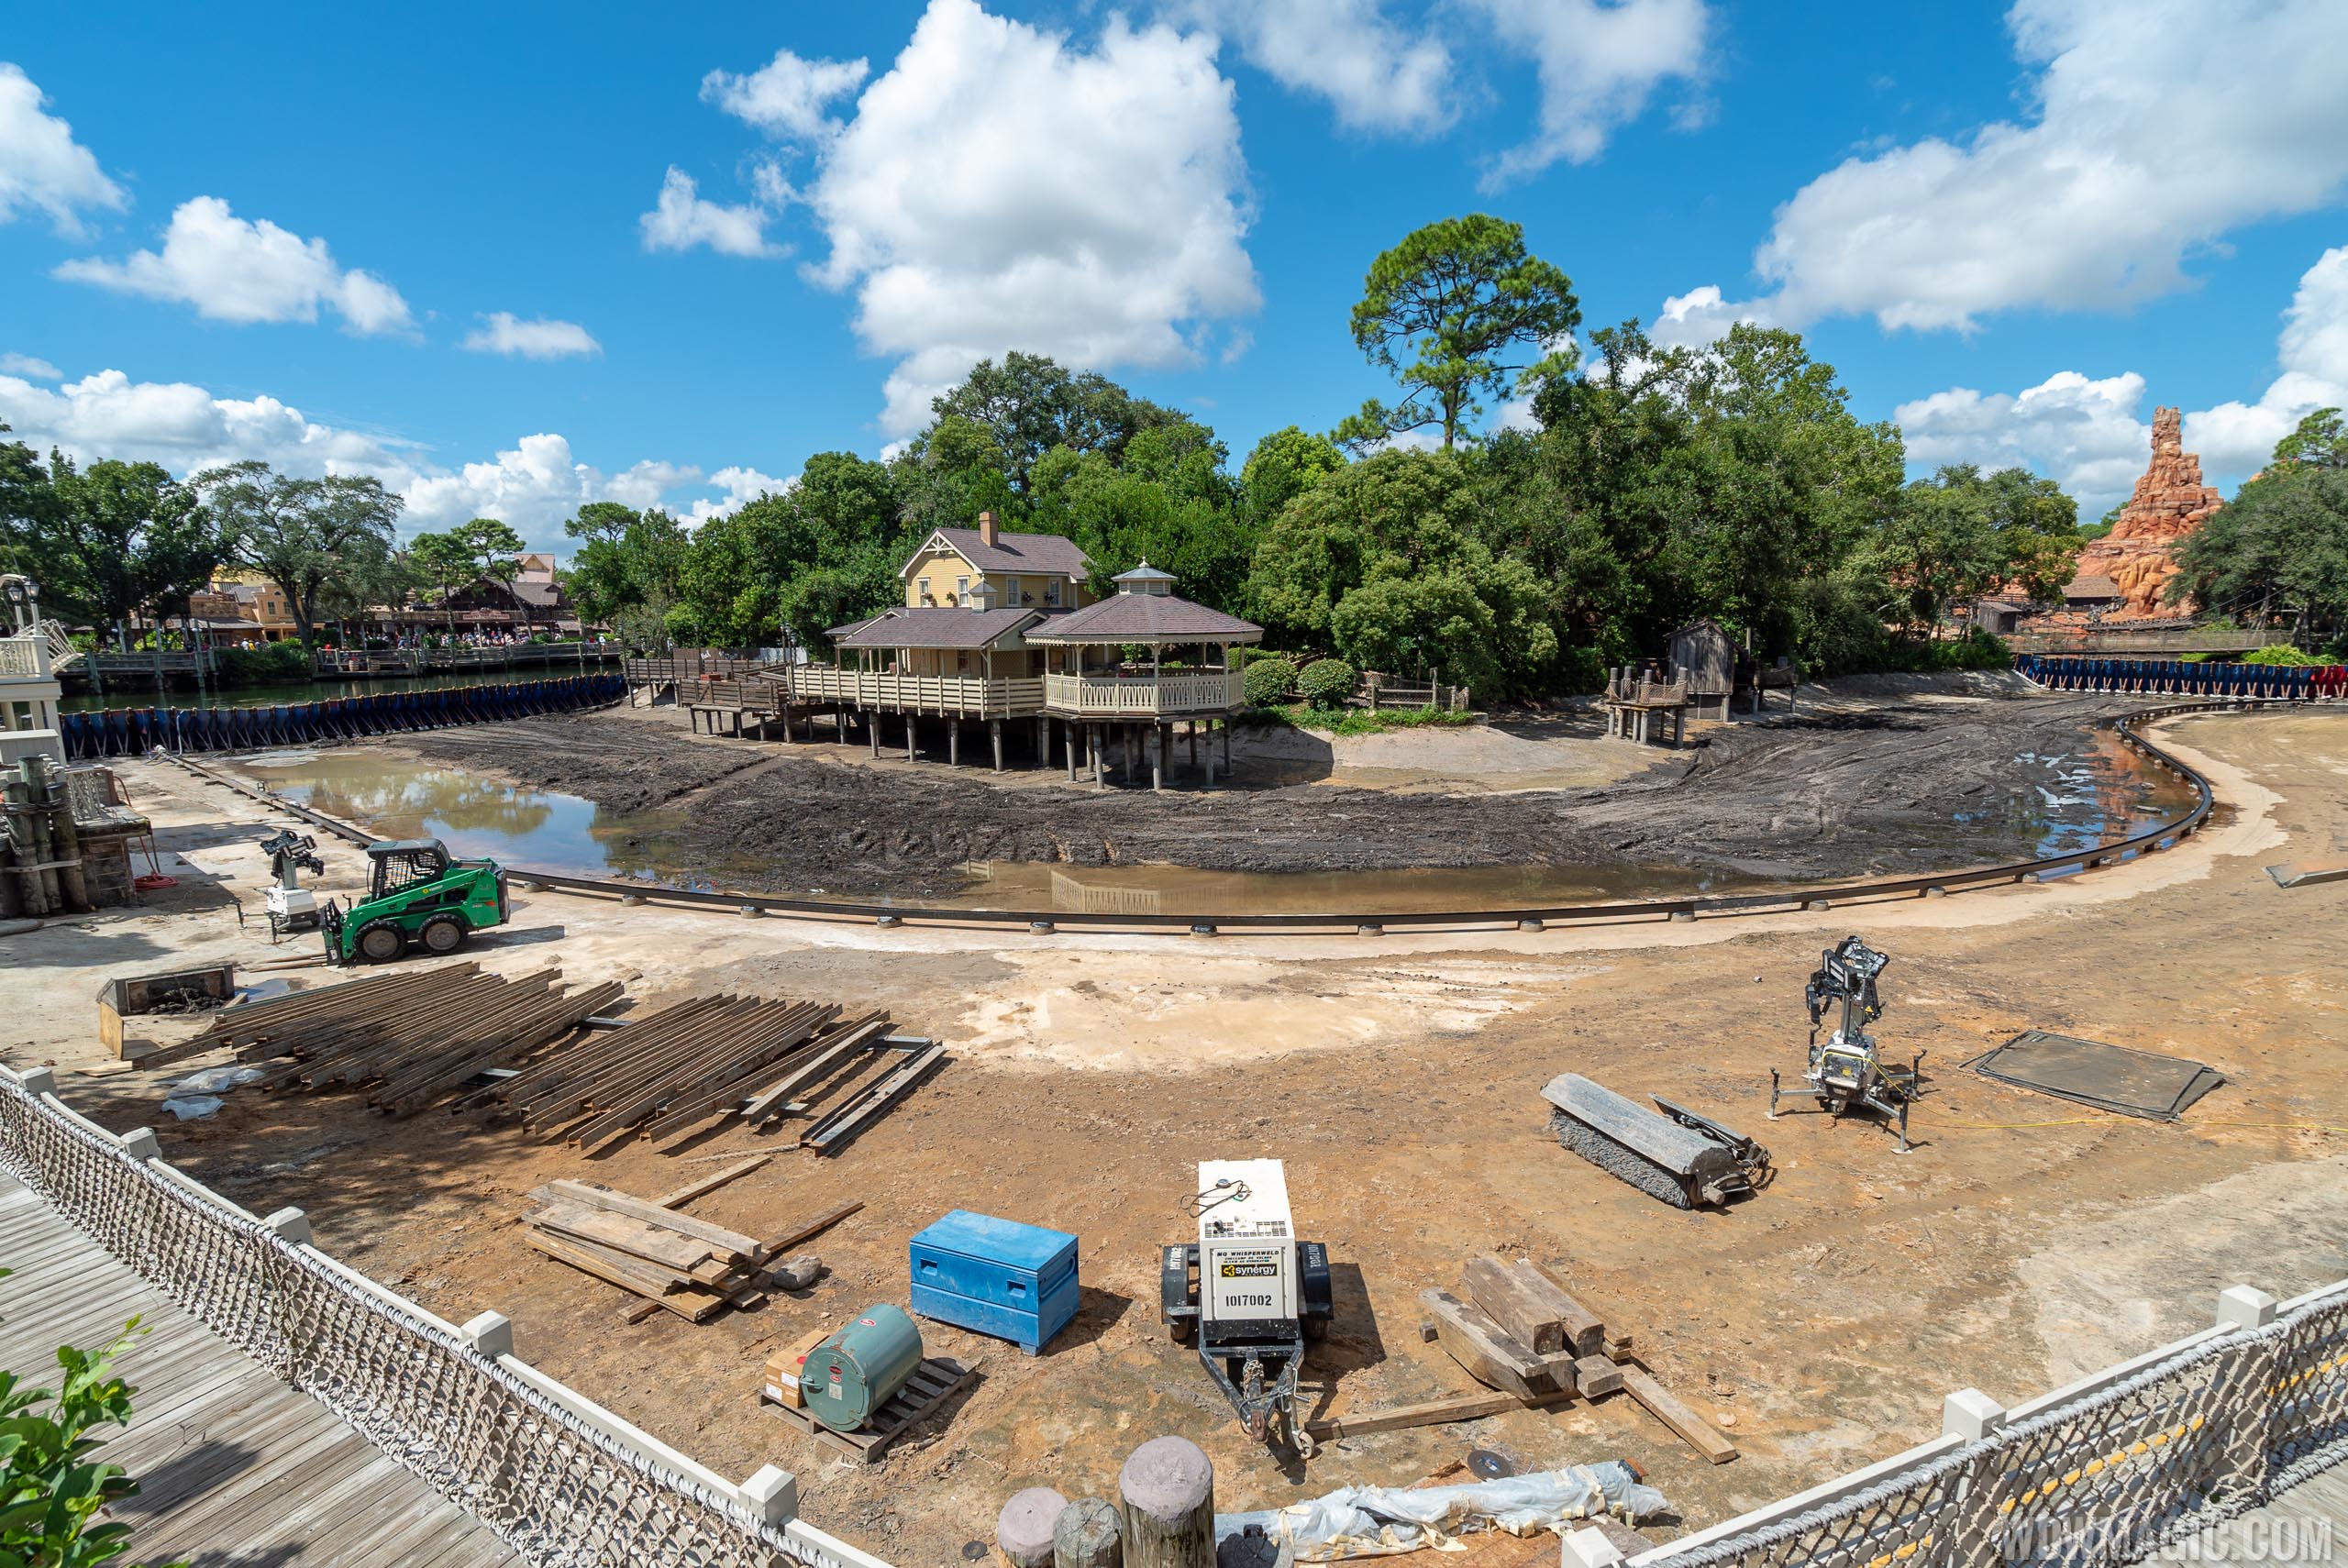 Rivers of America drained in 2018